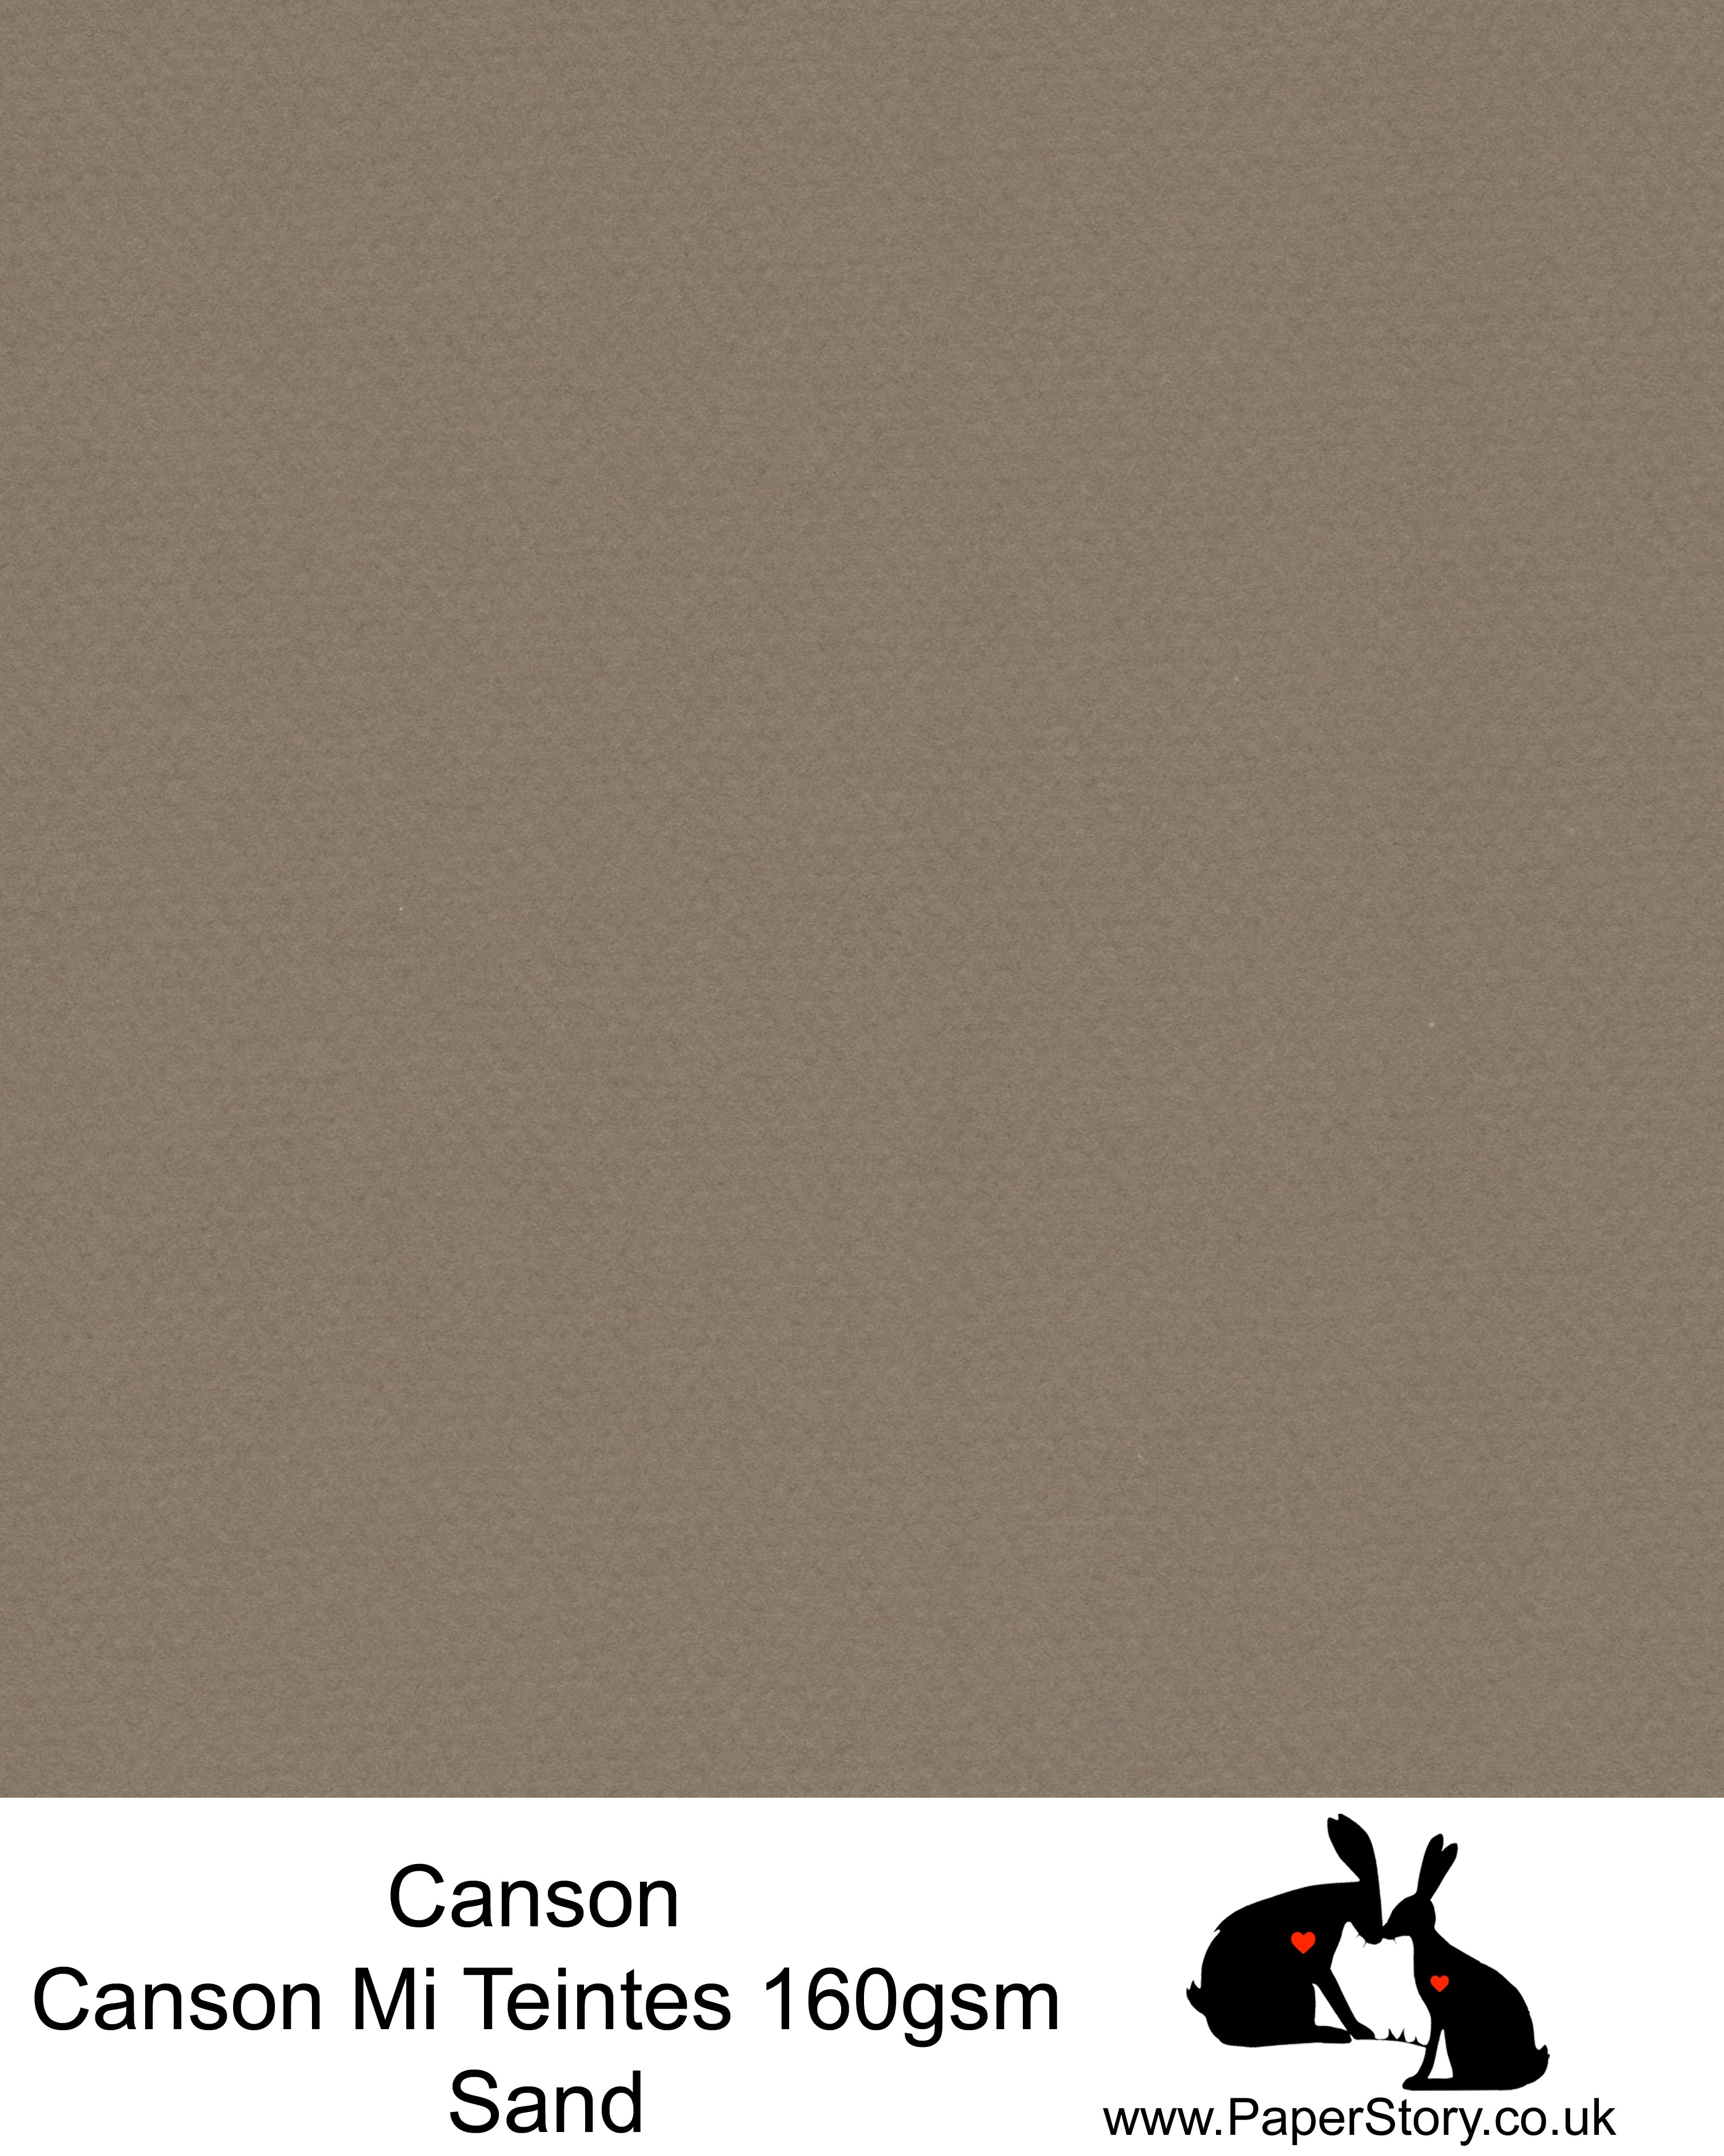 Canson Mi Teintes acid free, Sand, has hints of warm grey and brown palest pink almost white, hammered texture honeycomb surface paper 160 gsm. This is a popular and classic paper for all artists especially well respected for Pastel  and Papercutting made famous by Paper Panda.